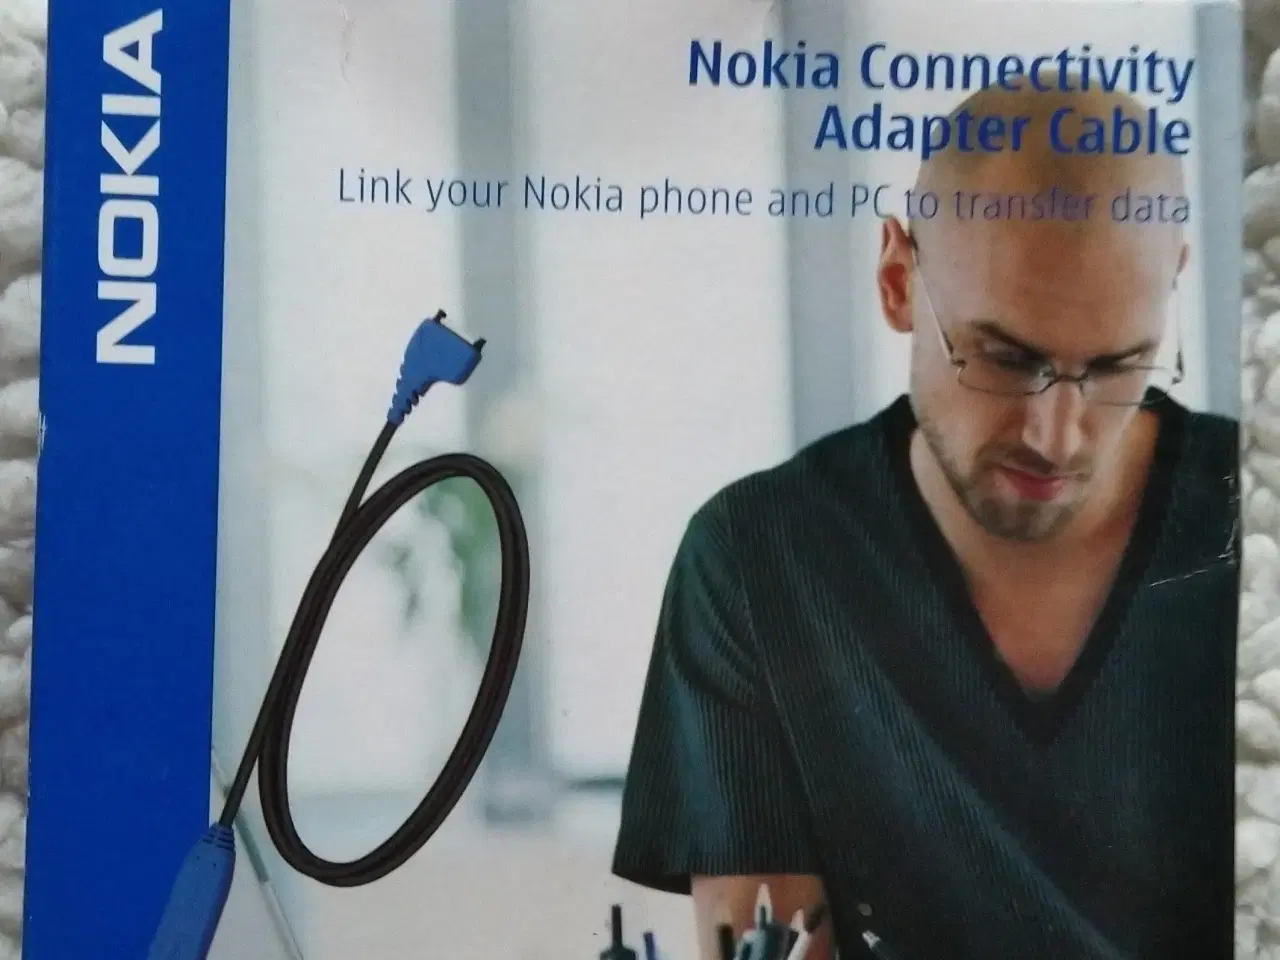 Billede 1 - Nokia Connectivity Adapter Cable